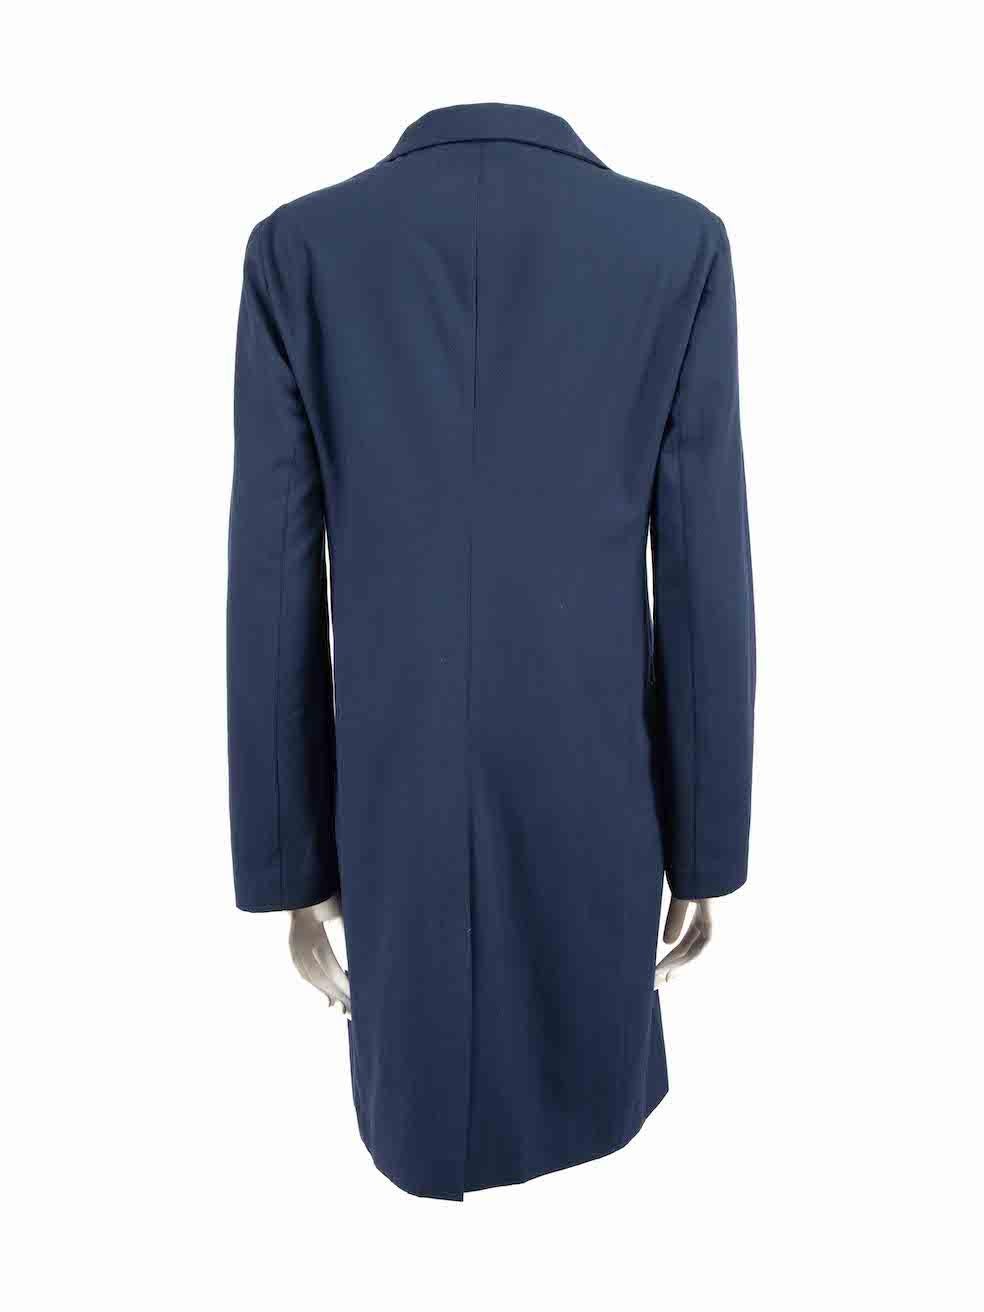 Miu Miu Blue Single Breast Mid-Length Coat Size L In Good Condition For Sale In London, GB